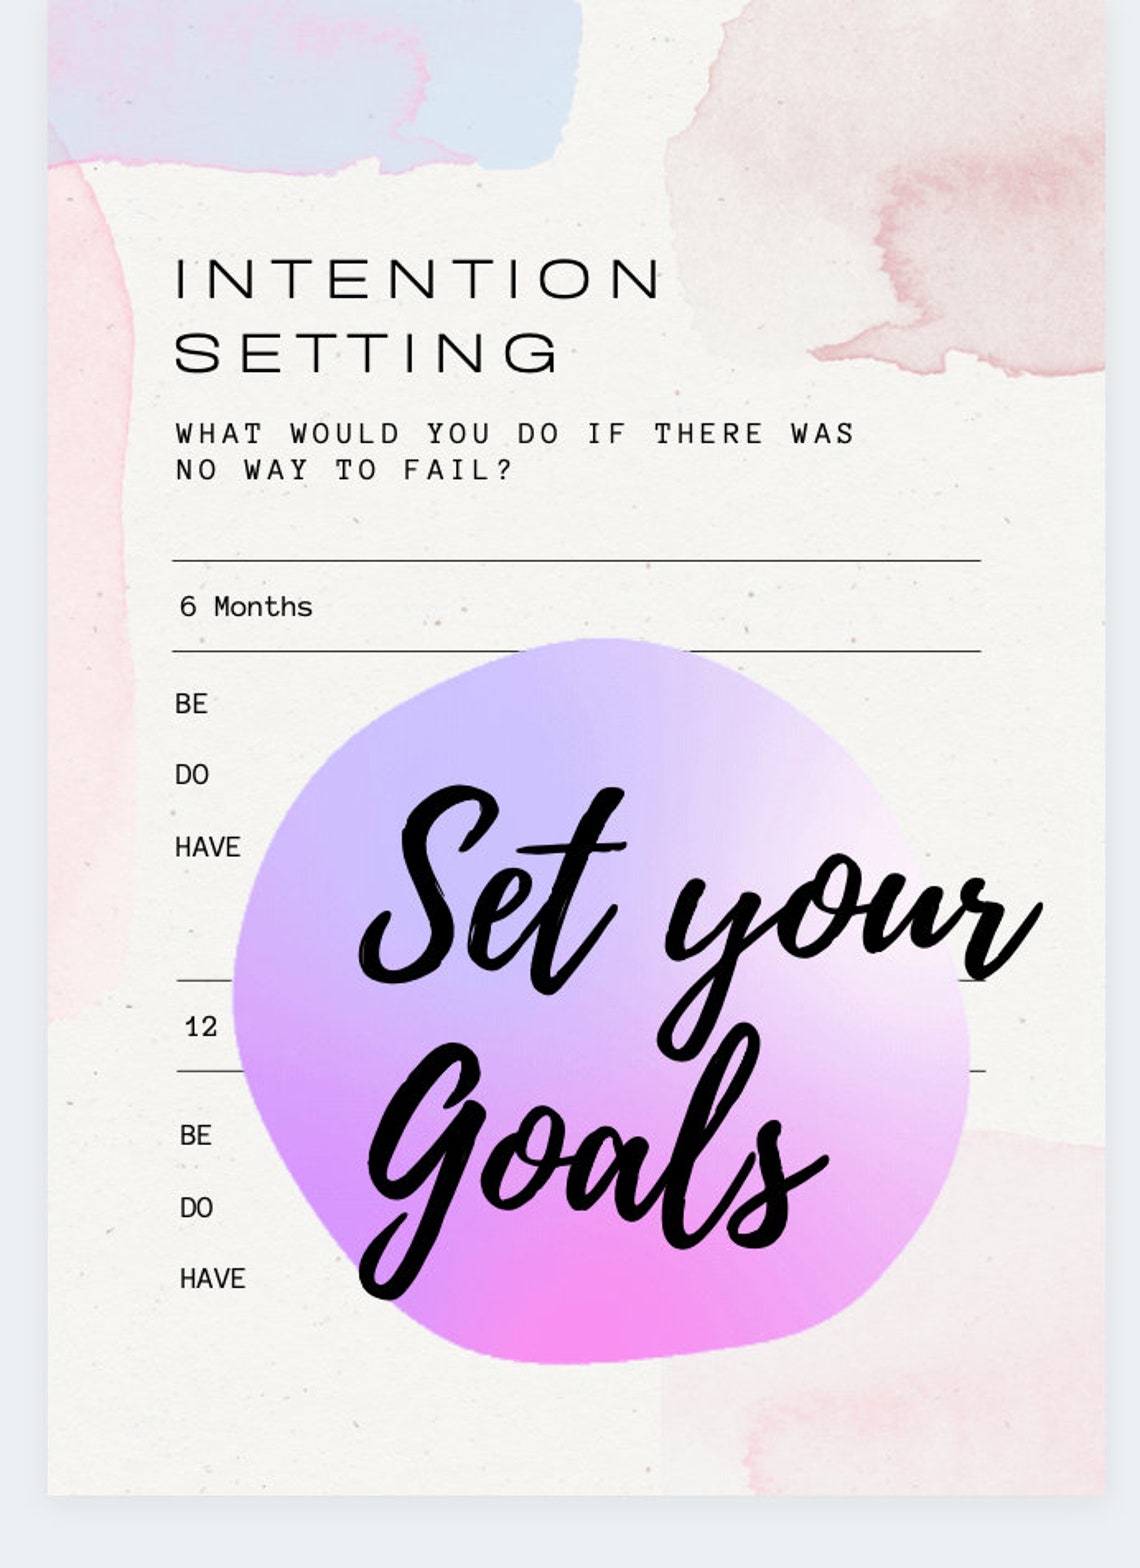 Intention Setting Exercise and Planner - Etsy UK